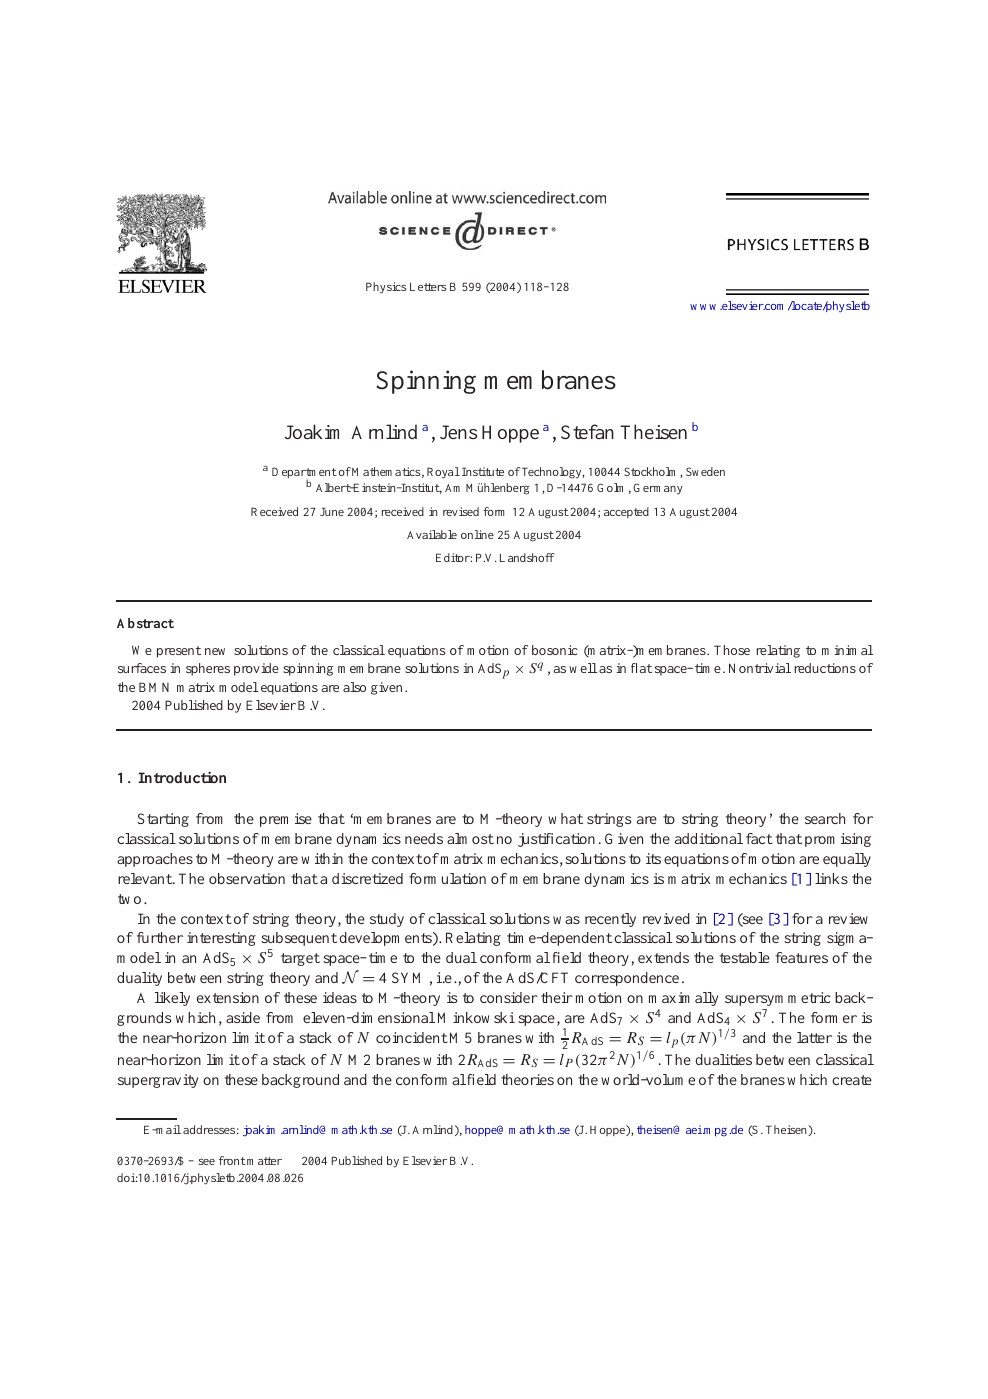 Spinning Membranes Topic Of Research Paper In Physical Sciences Download Scholarly Article Pdf And Read For Free On Cyberleninka Open Science Hub